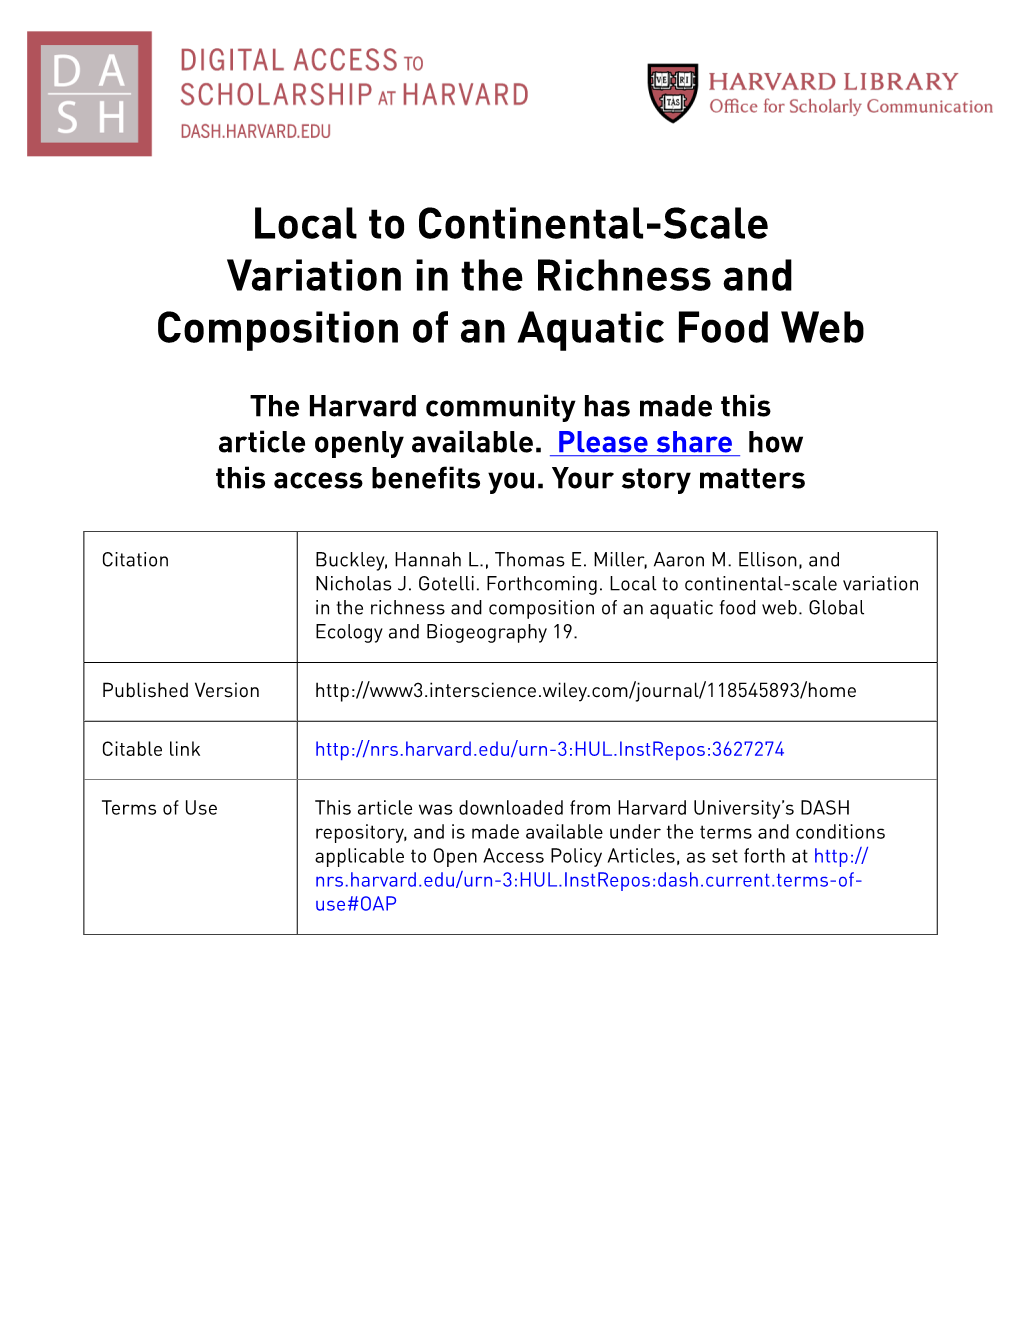 Local to Continental-Scale Variation in the Richness and Composition of an Aquatic Food Web